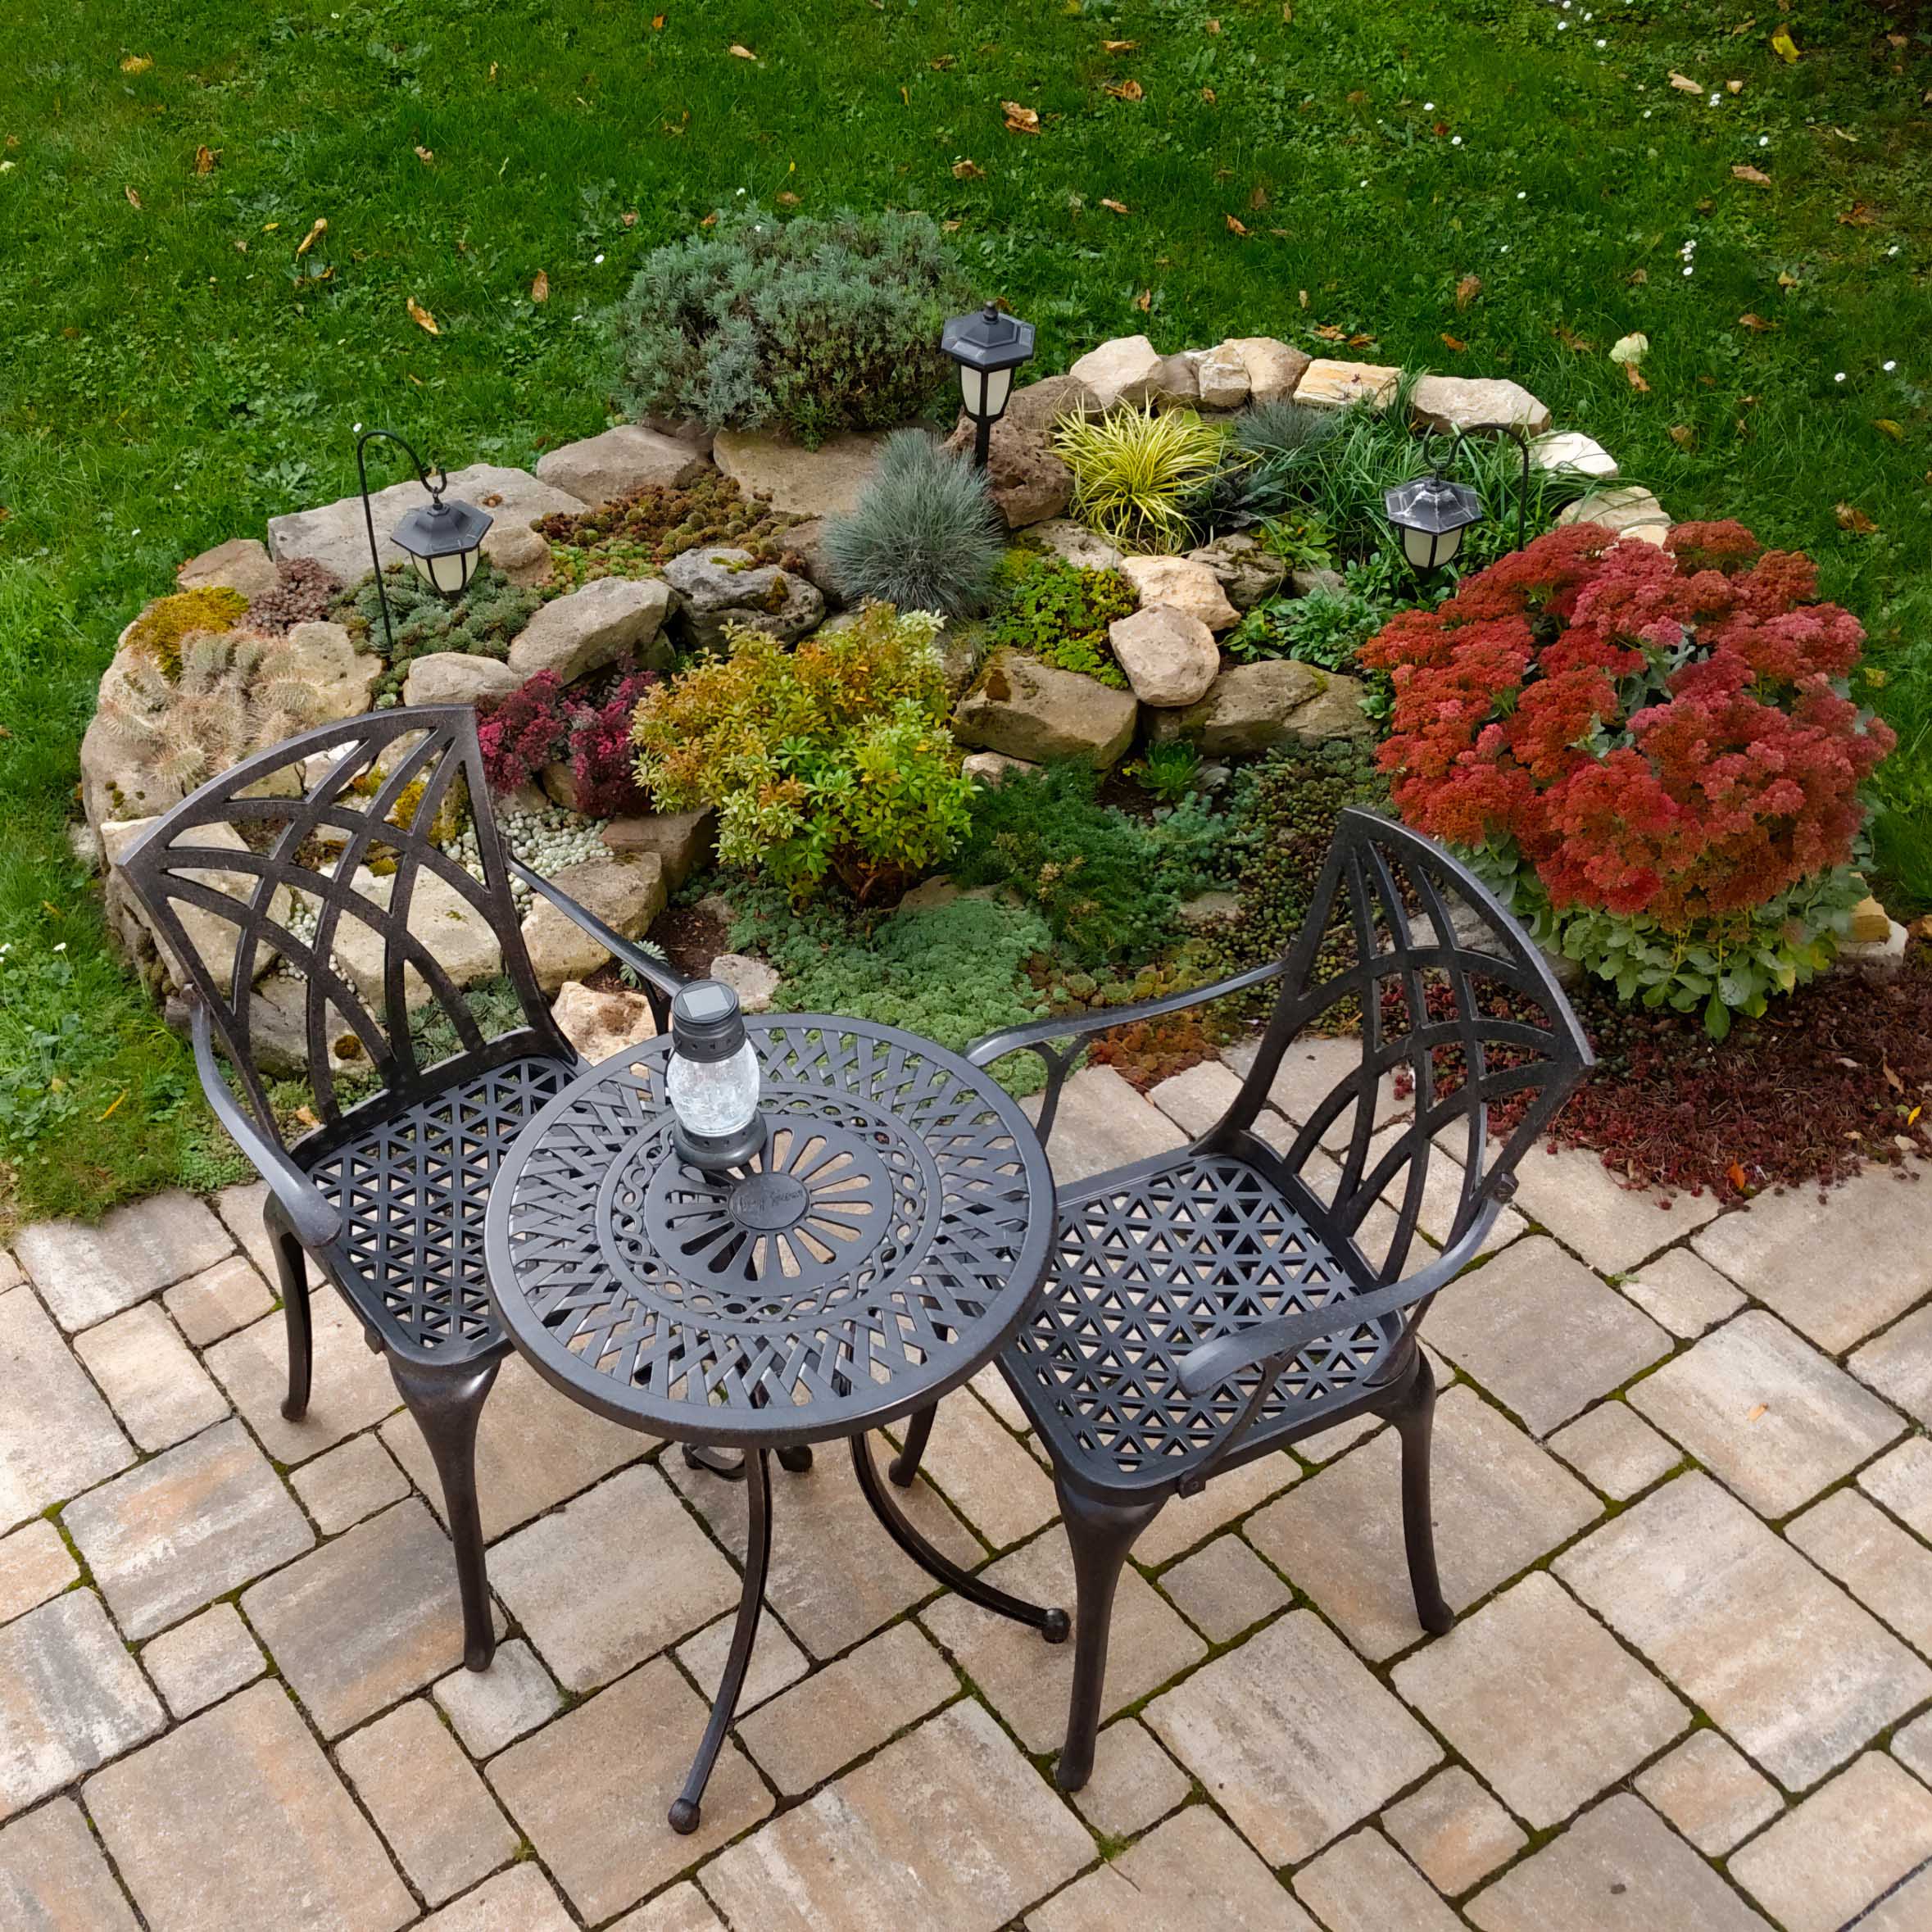 How do you create good scale and proportion on your patio?